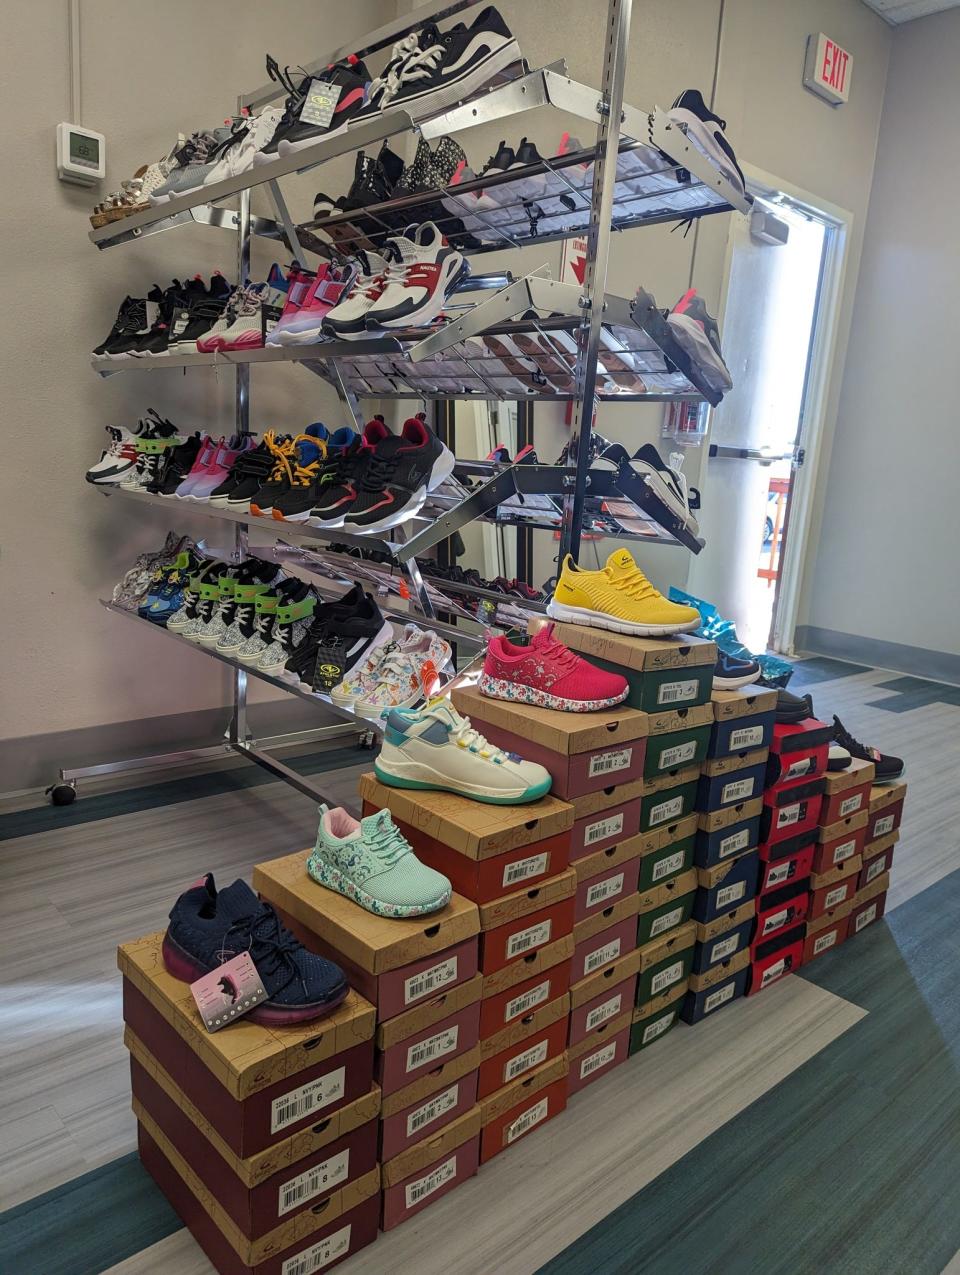 Shoes available at the Tiger Care Center. A new center for homeless families and students in need or referred by staff. The Tiger Care Center houses items like clothing, toiletries, food and an on-site social worker.